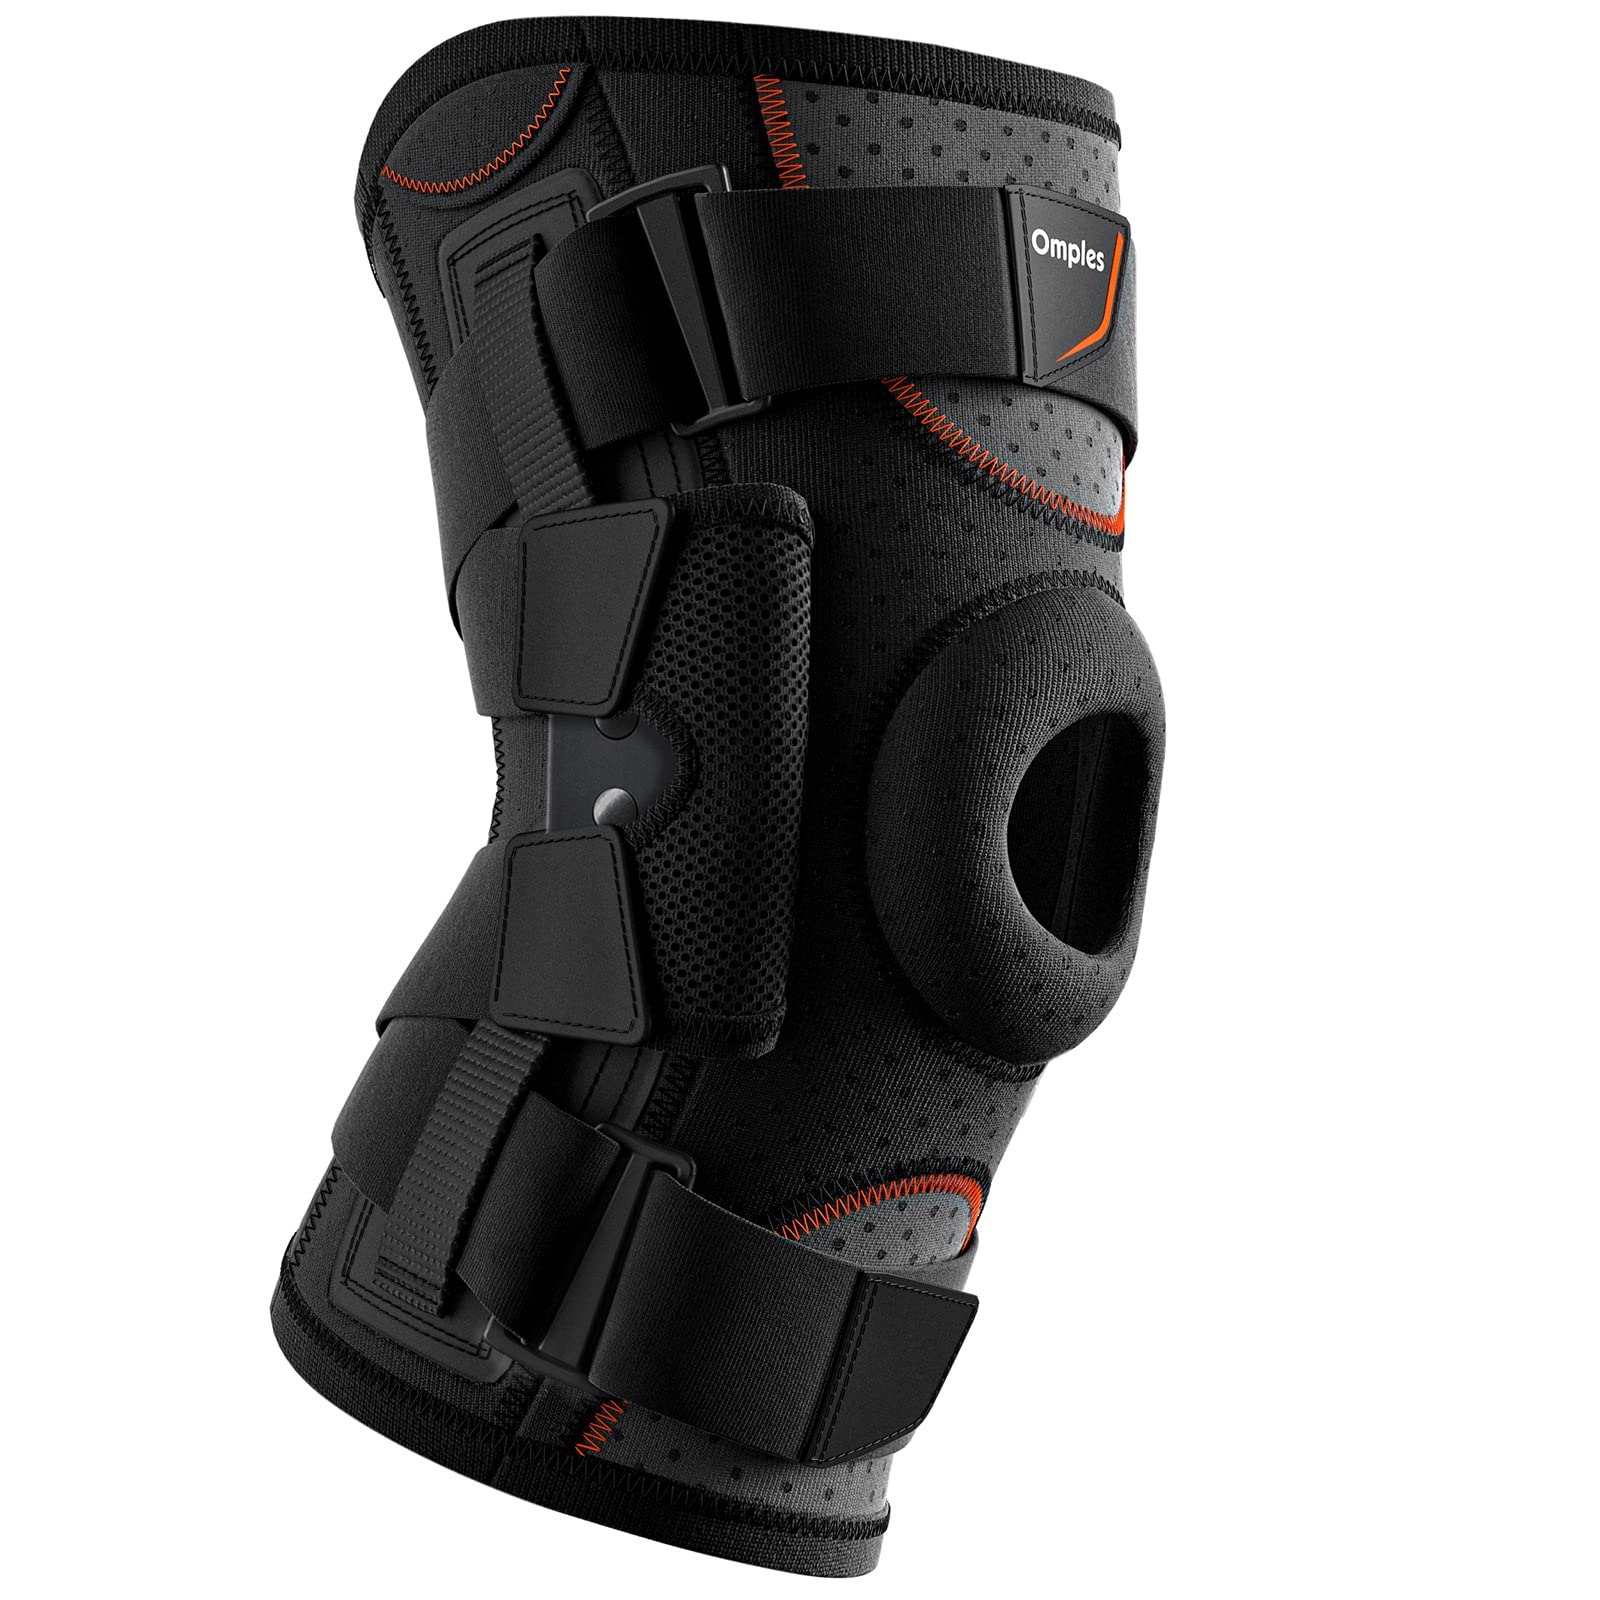 Which Knee Support & Brace for Arthritis Pain? 